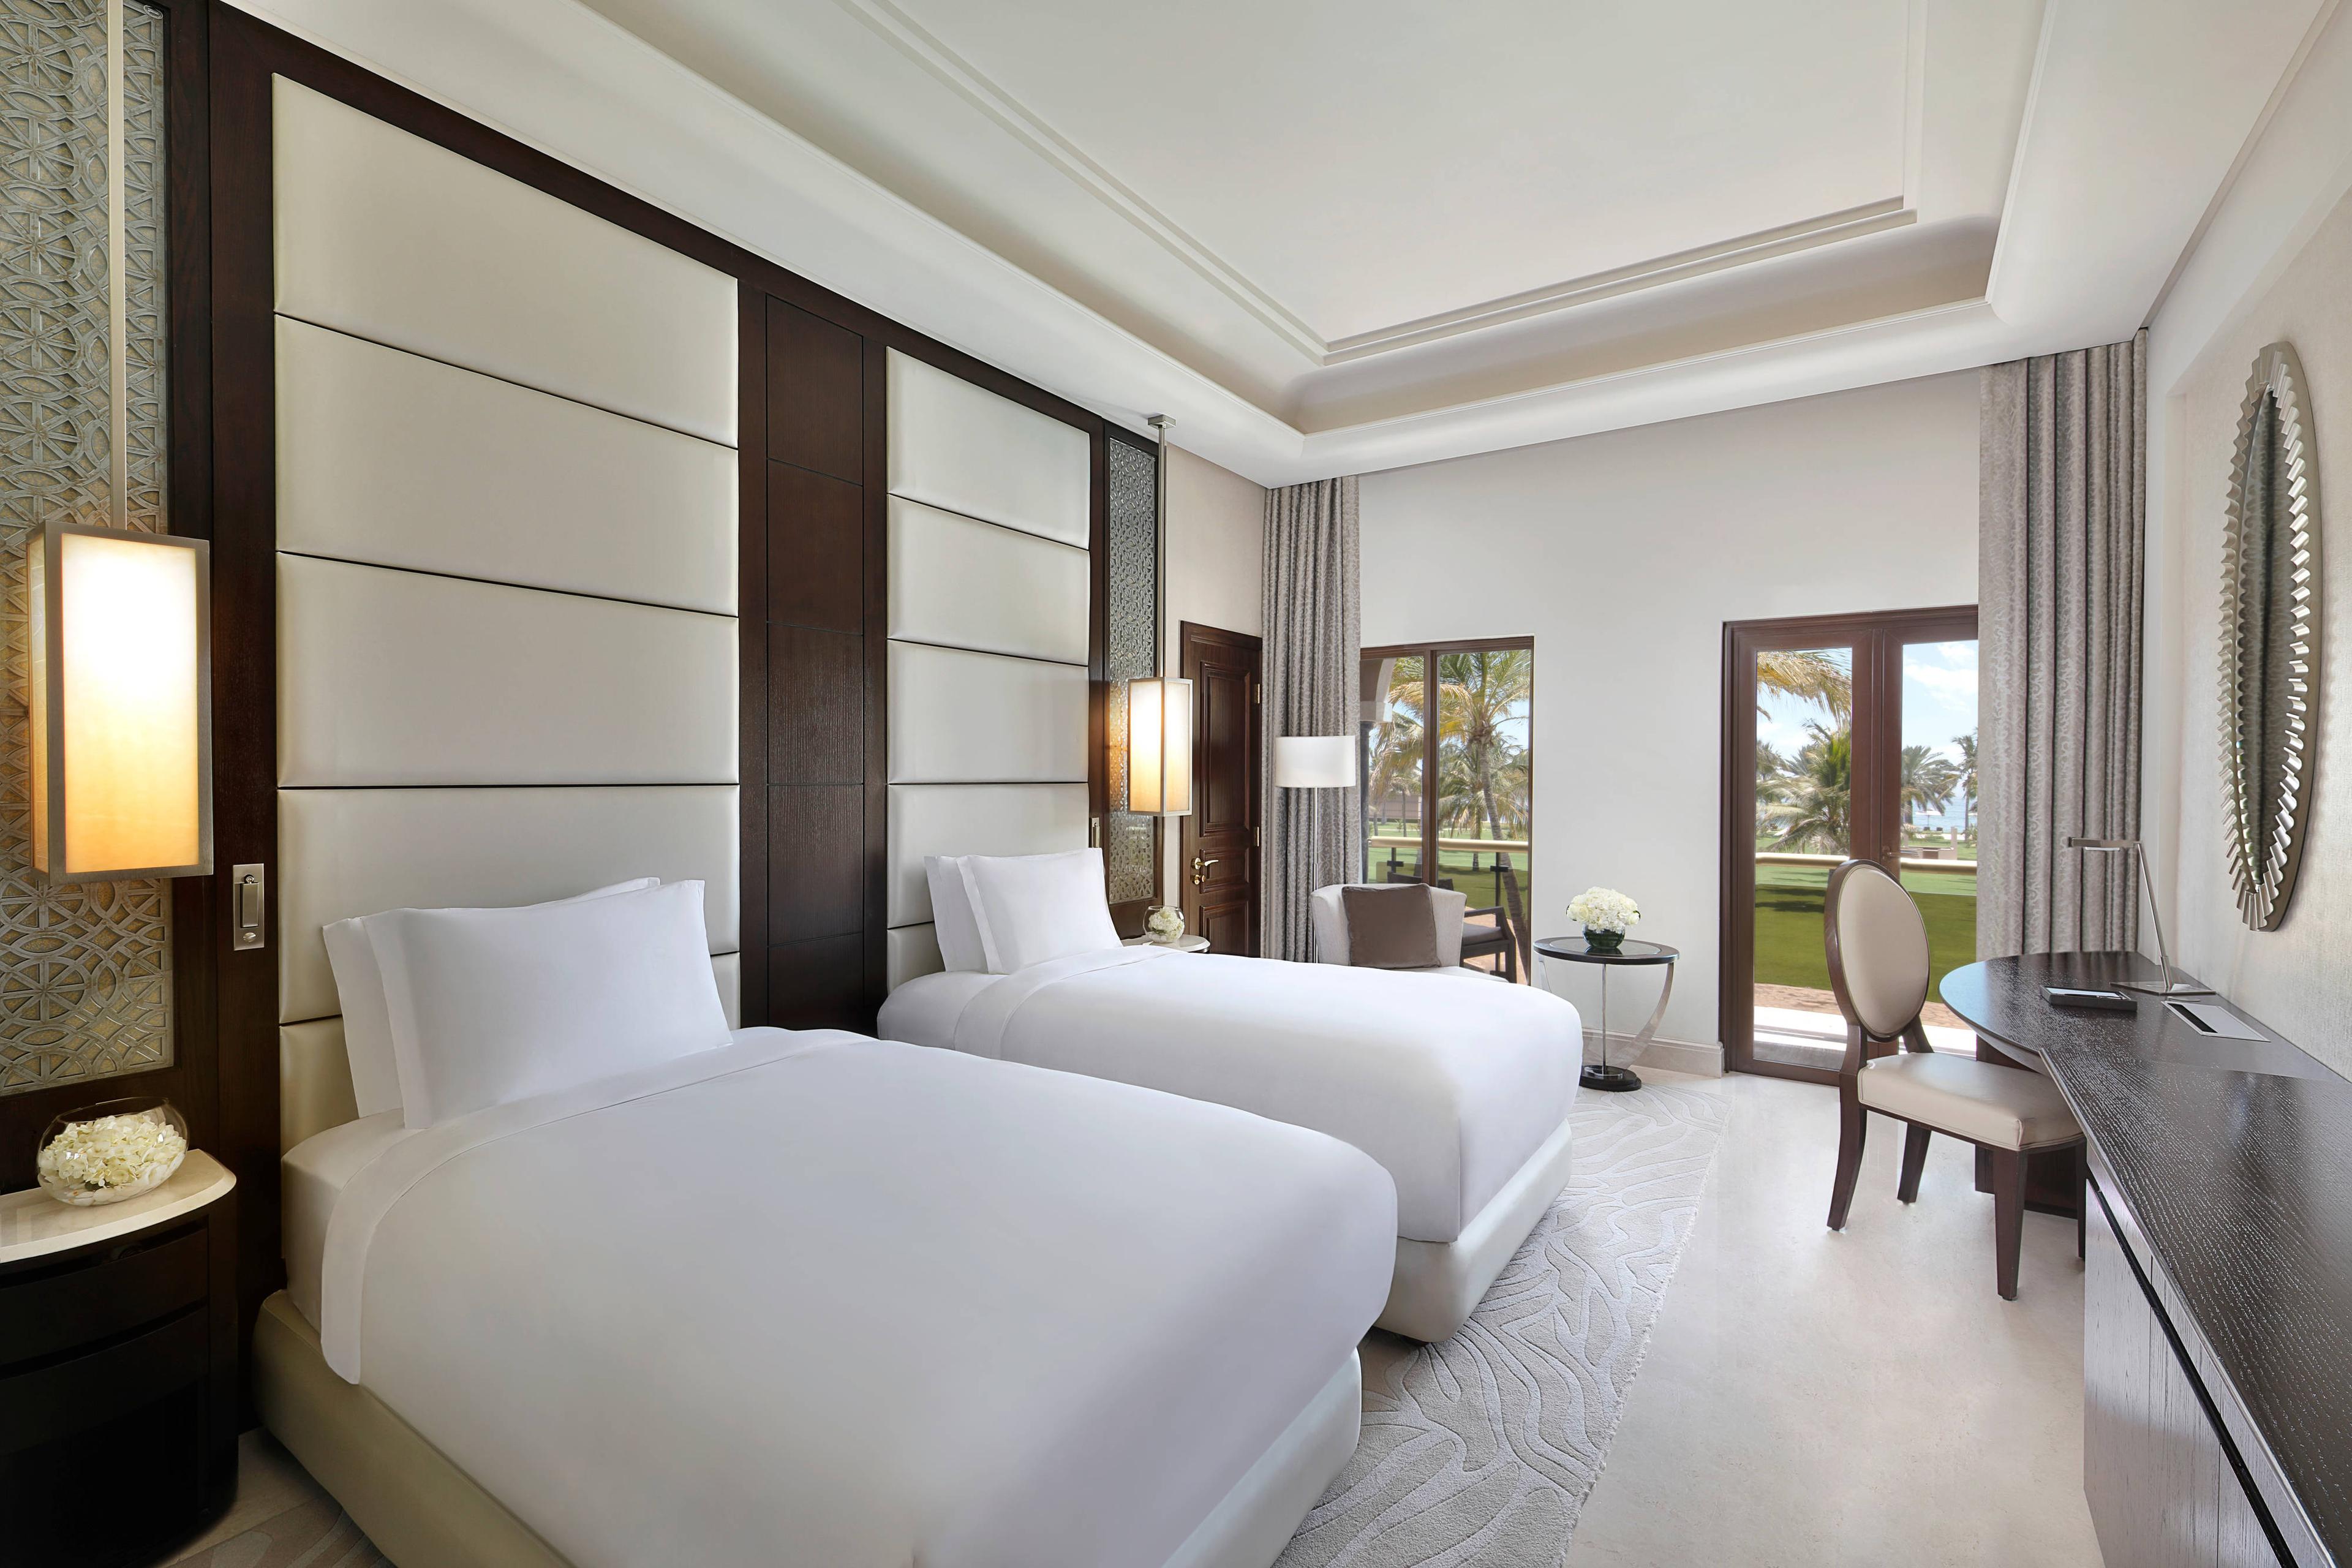 Deluxe Pool View Rooms offer views over the gardens, pools and the gulf of Oman on the horizon.